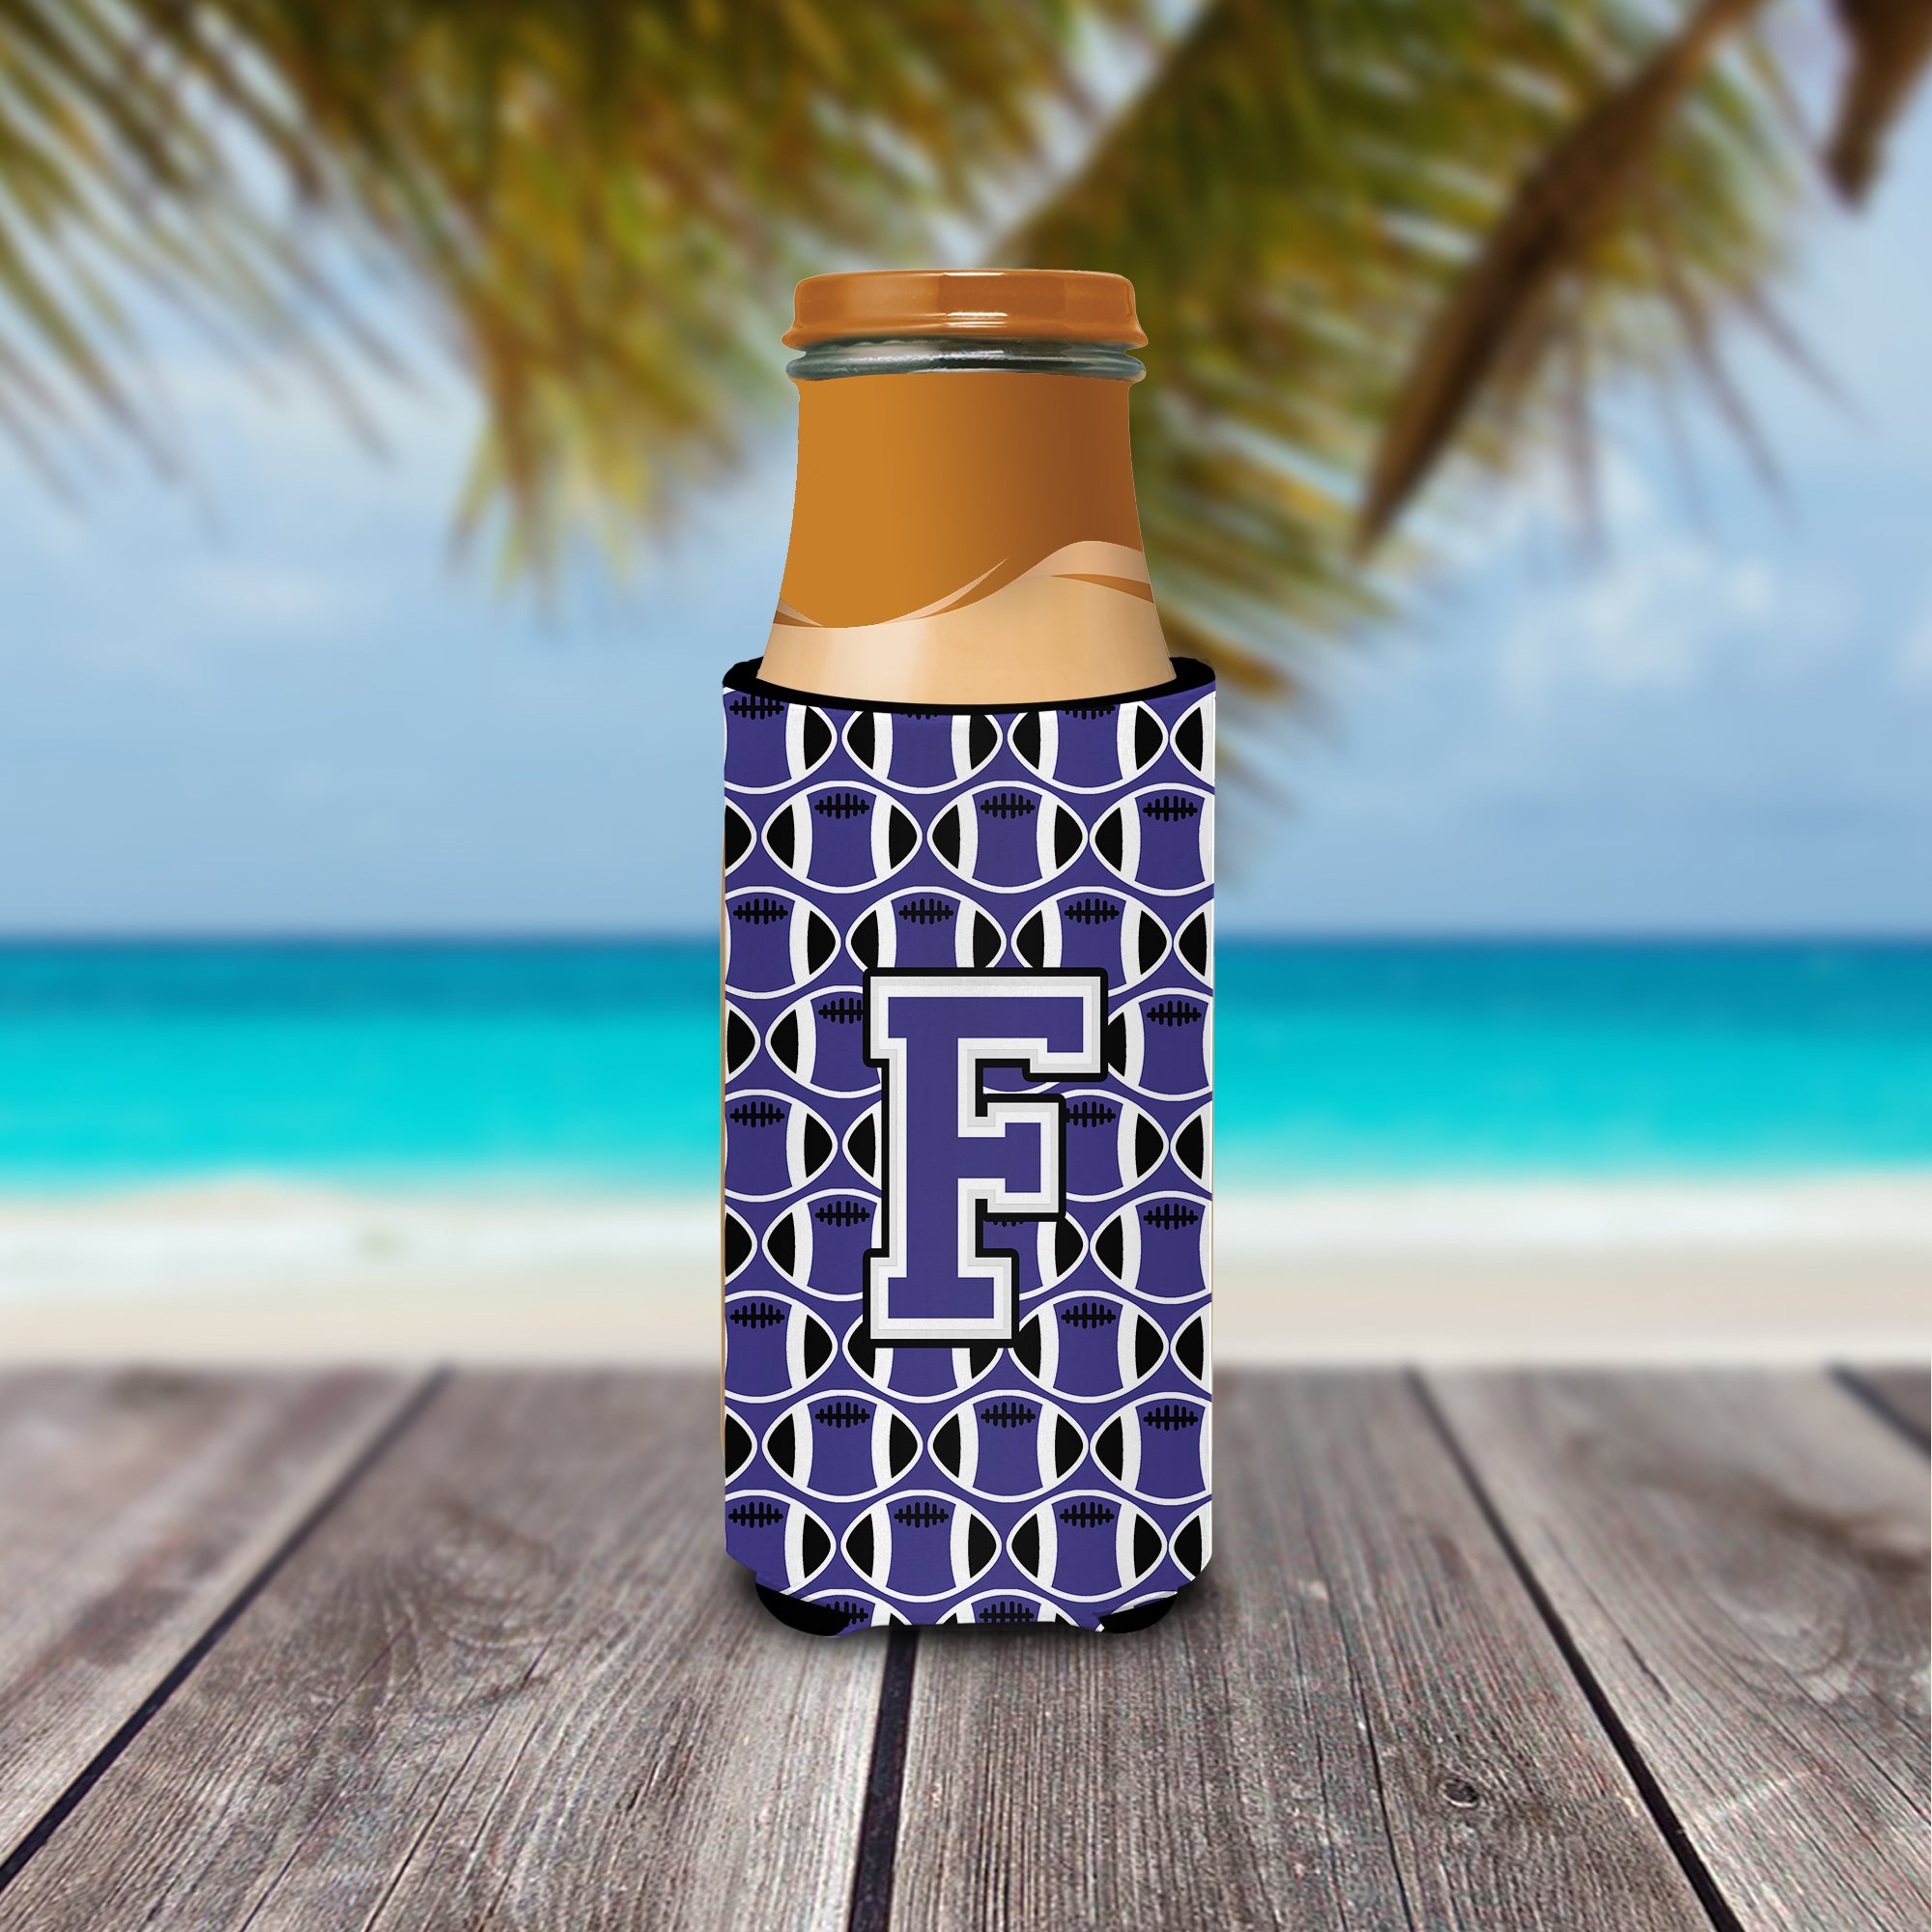 Letter F Football Purple and White Ultra Beverage Insulators for slim cans CJ1068-FMUK.